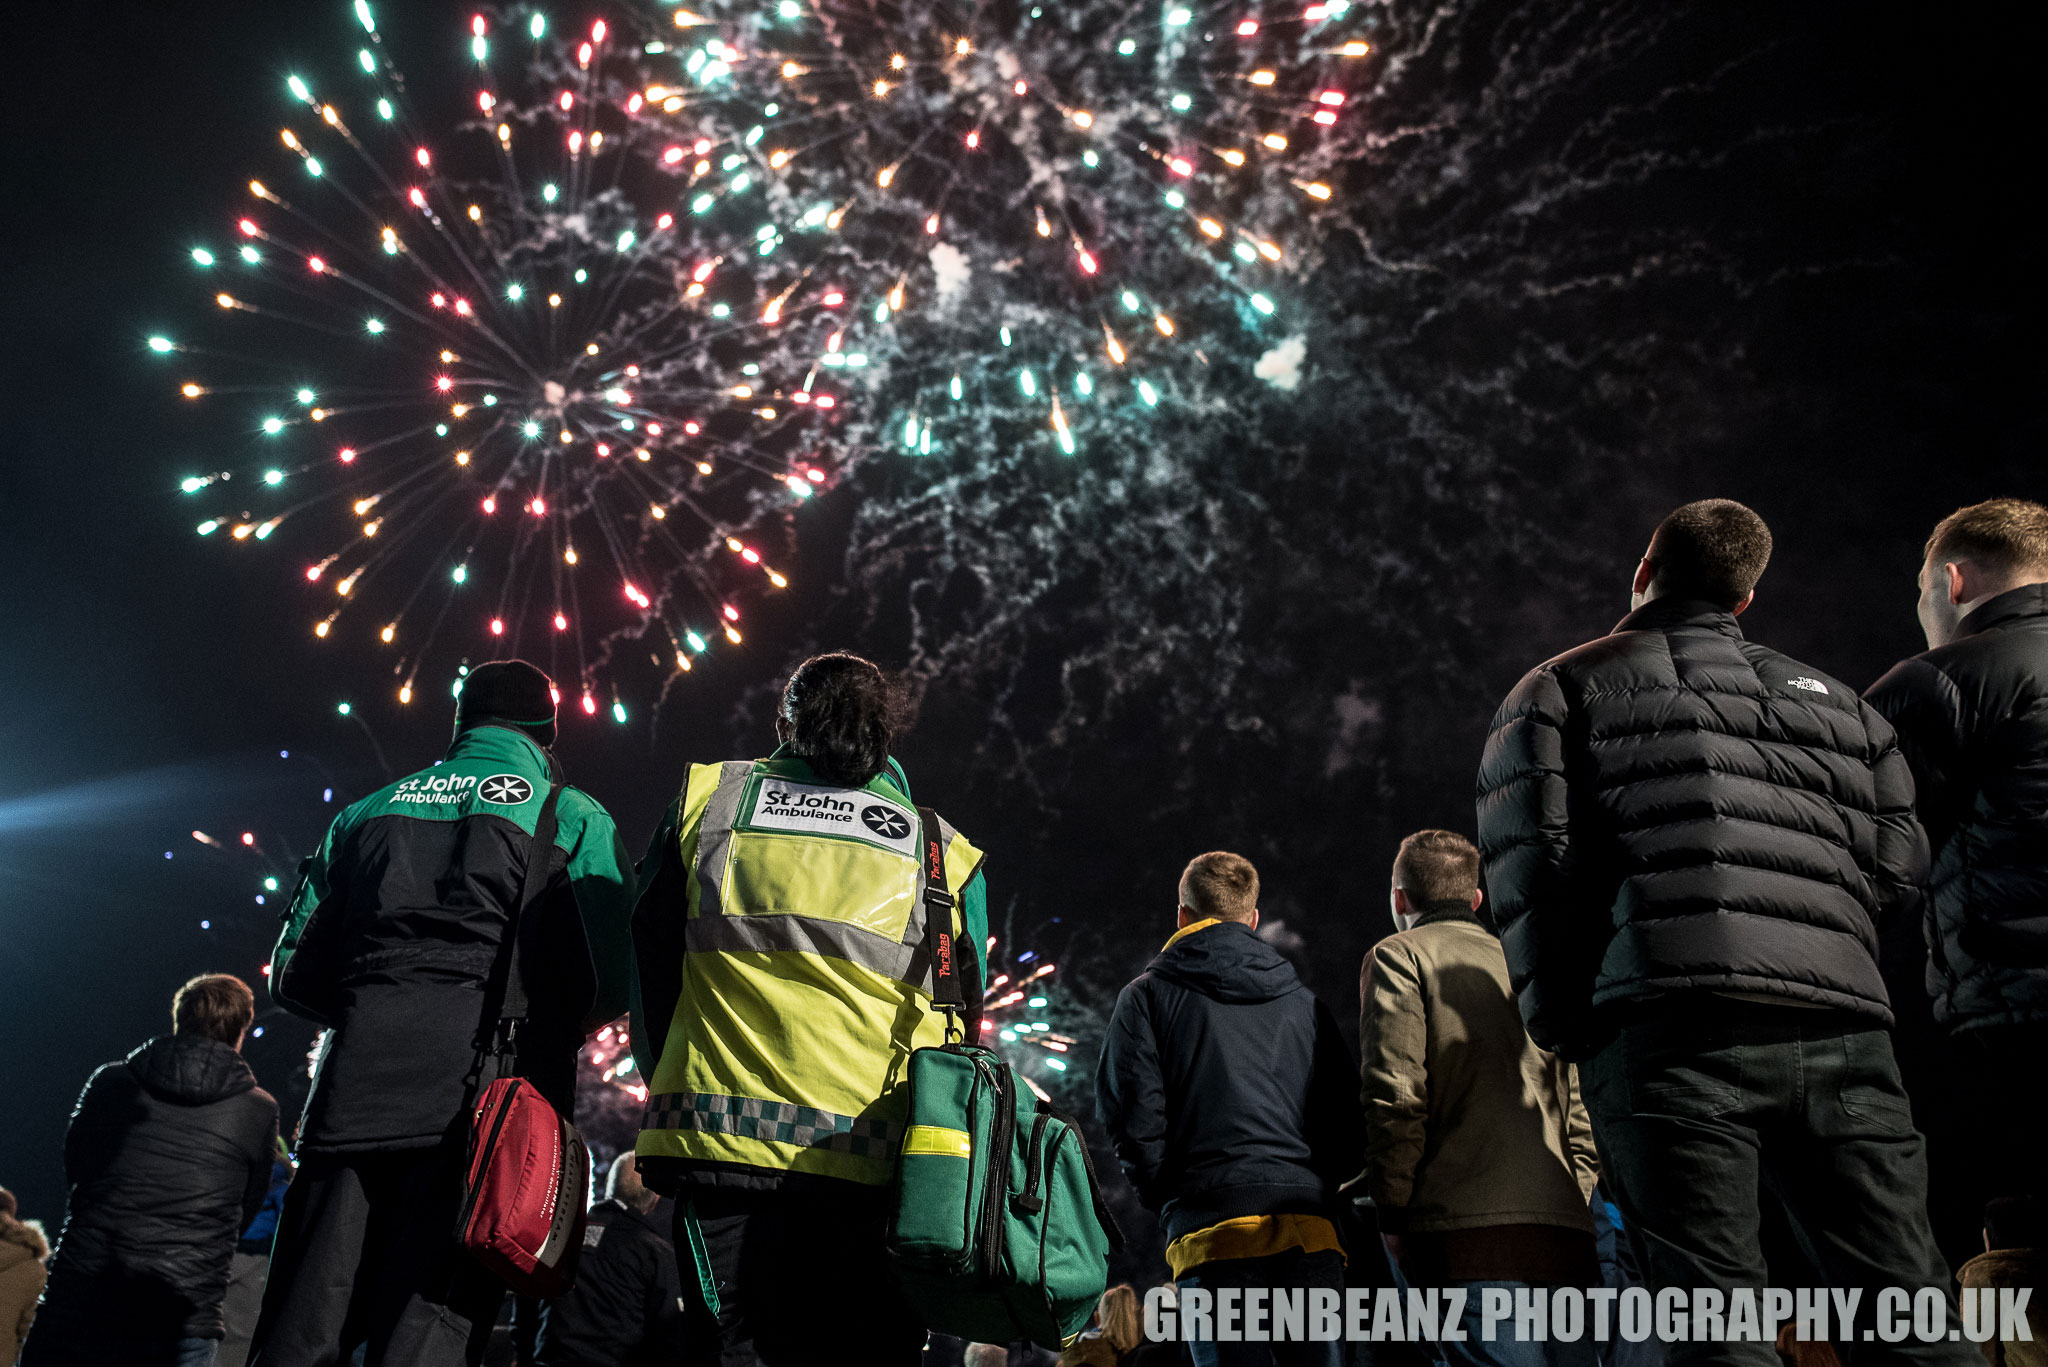 Plymouth 2019 fireworks shooting a national campaign for St Johns Ambulance